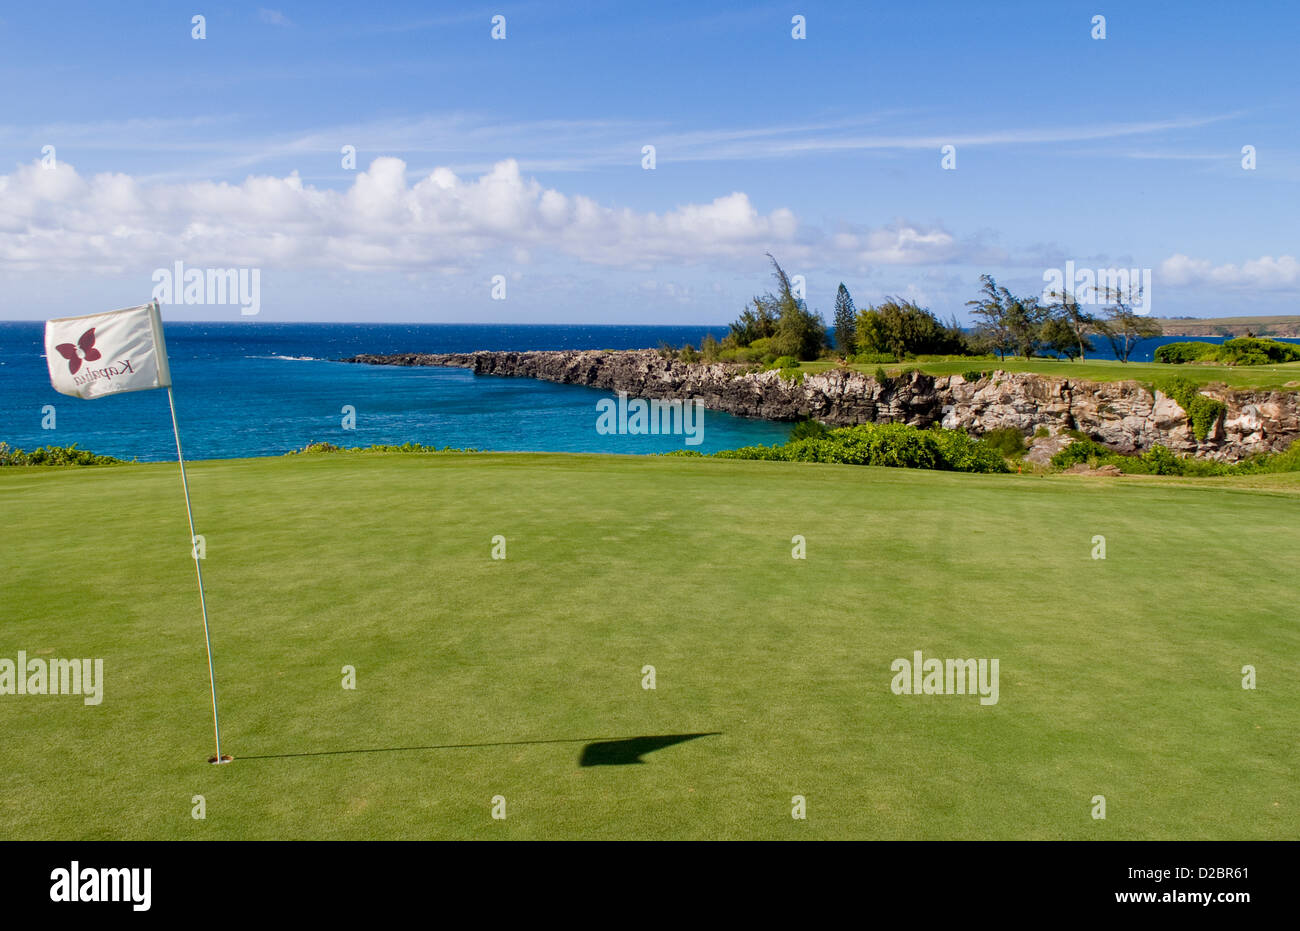 Hole #5 On The Beach At The Toughest Par 3 In Hawaii At The Kapalua Bay Course Stock Photo